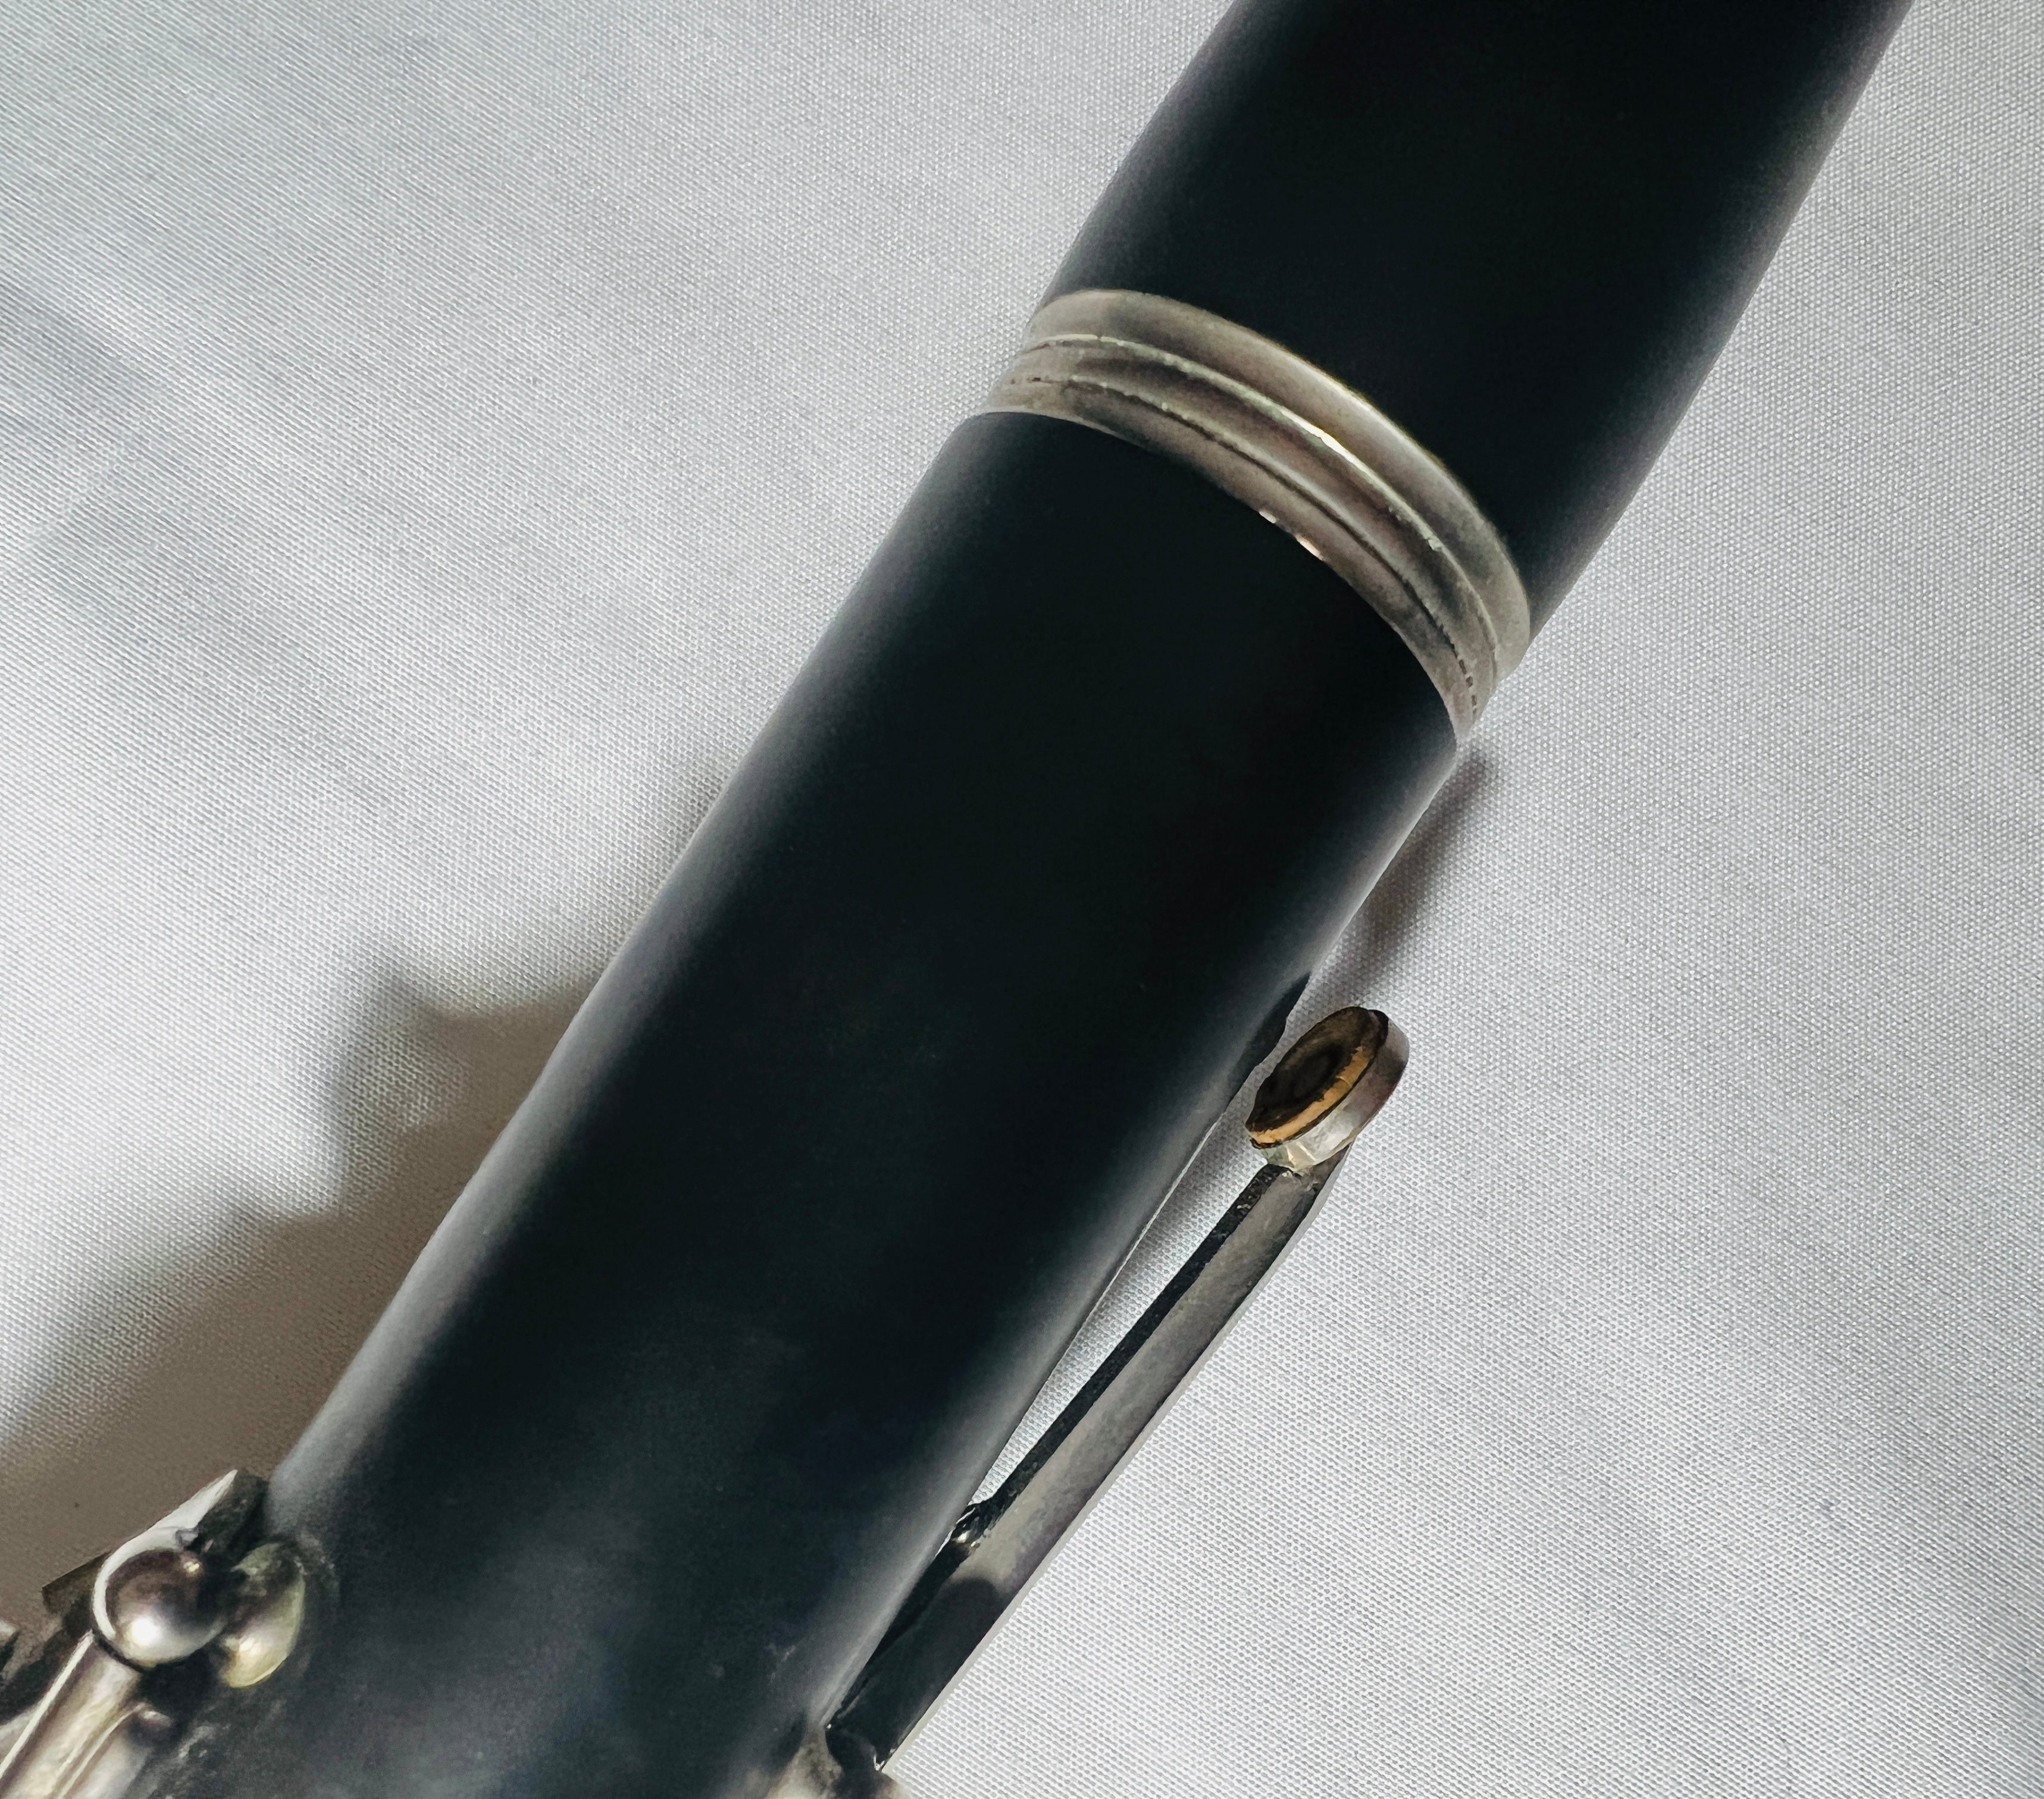 Jean Paul Clarinet Plastic Body Minor Tune Up AS IS USED